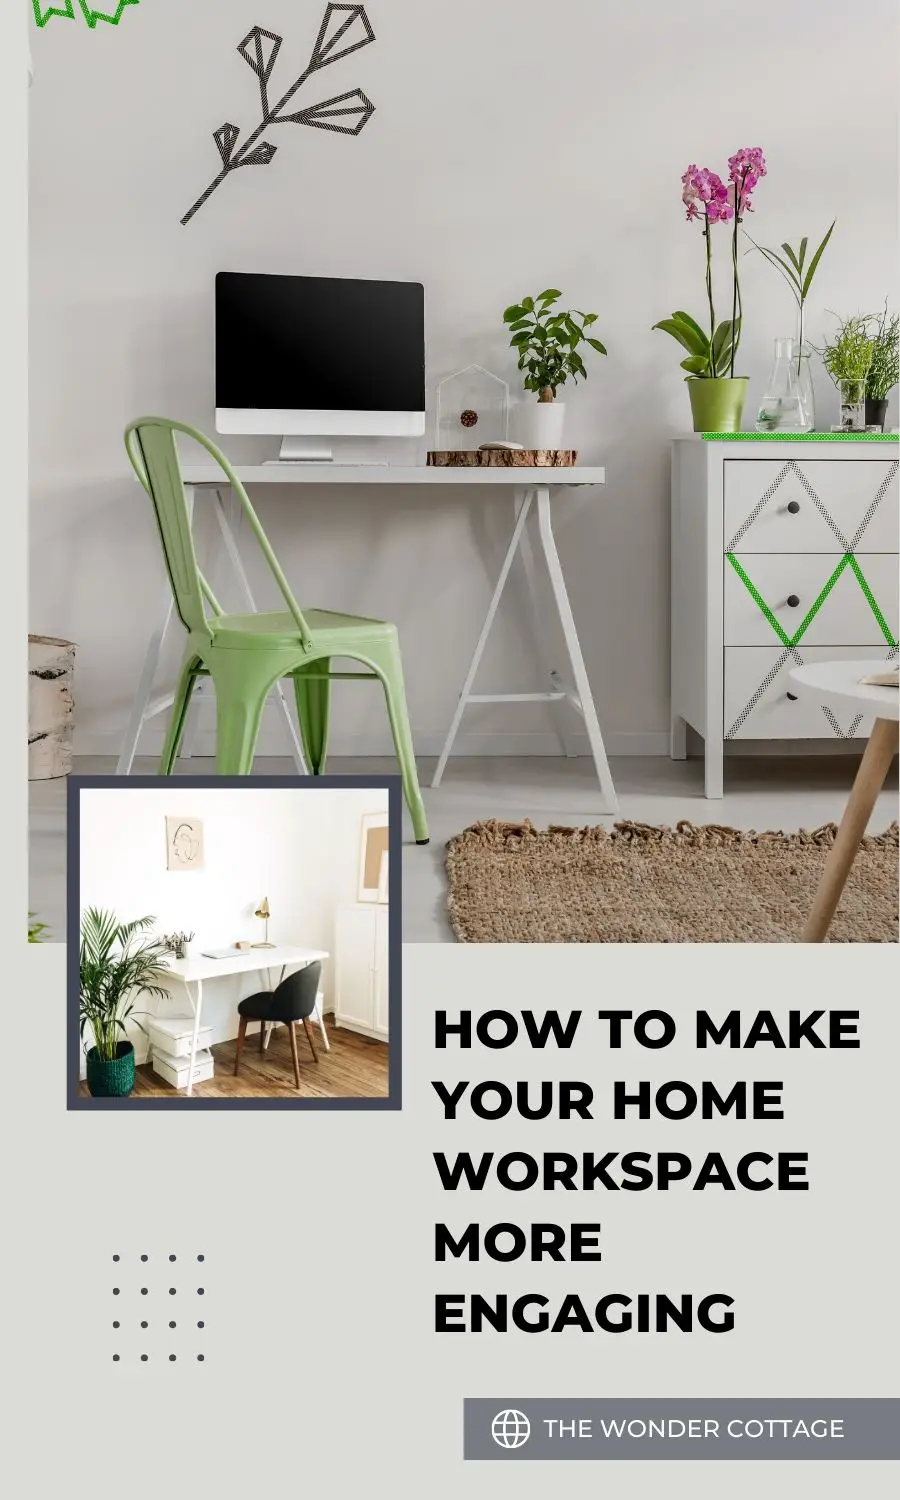 How To Make Your Home Workspace More Engaging